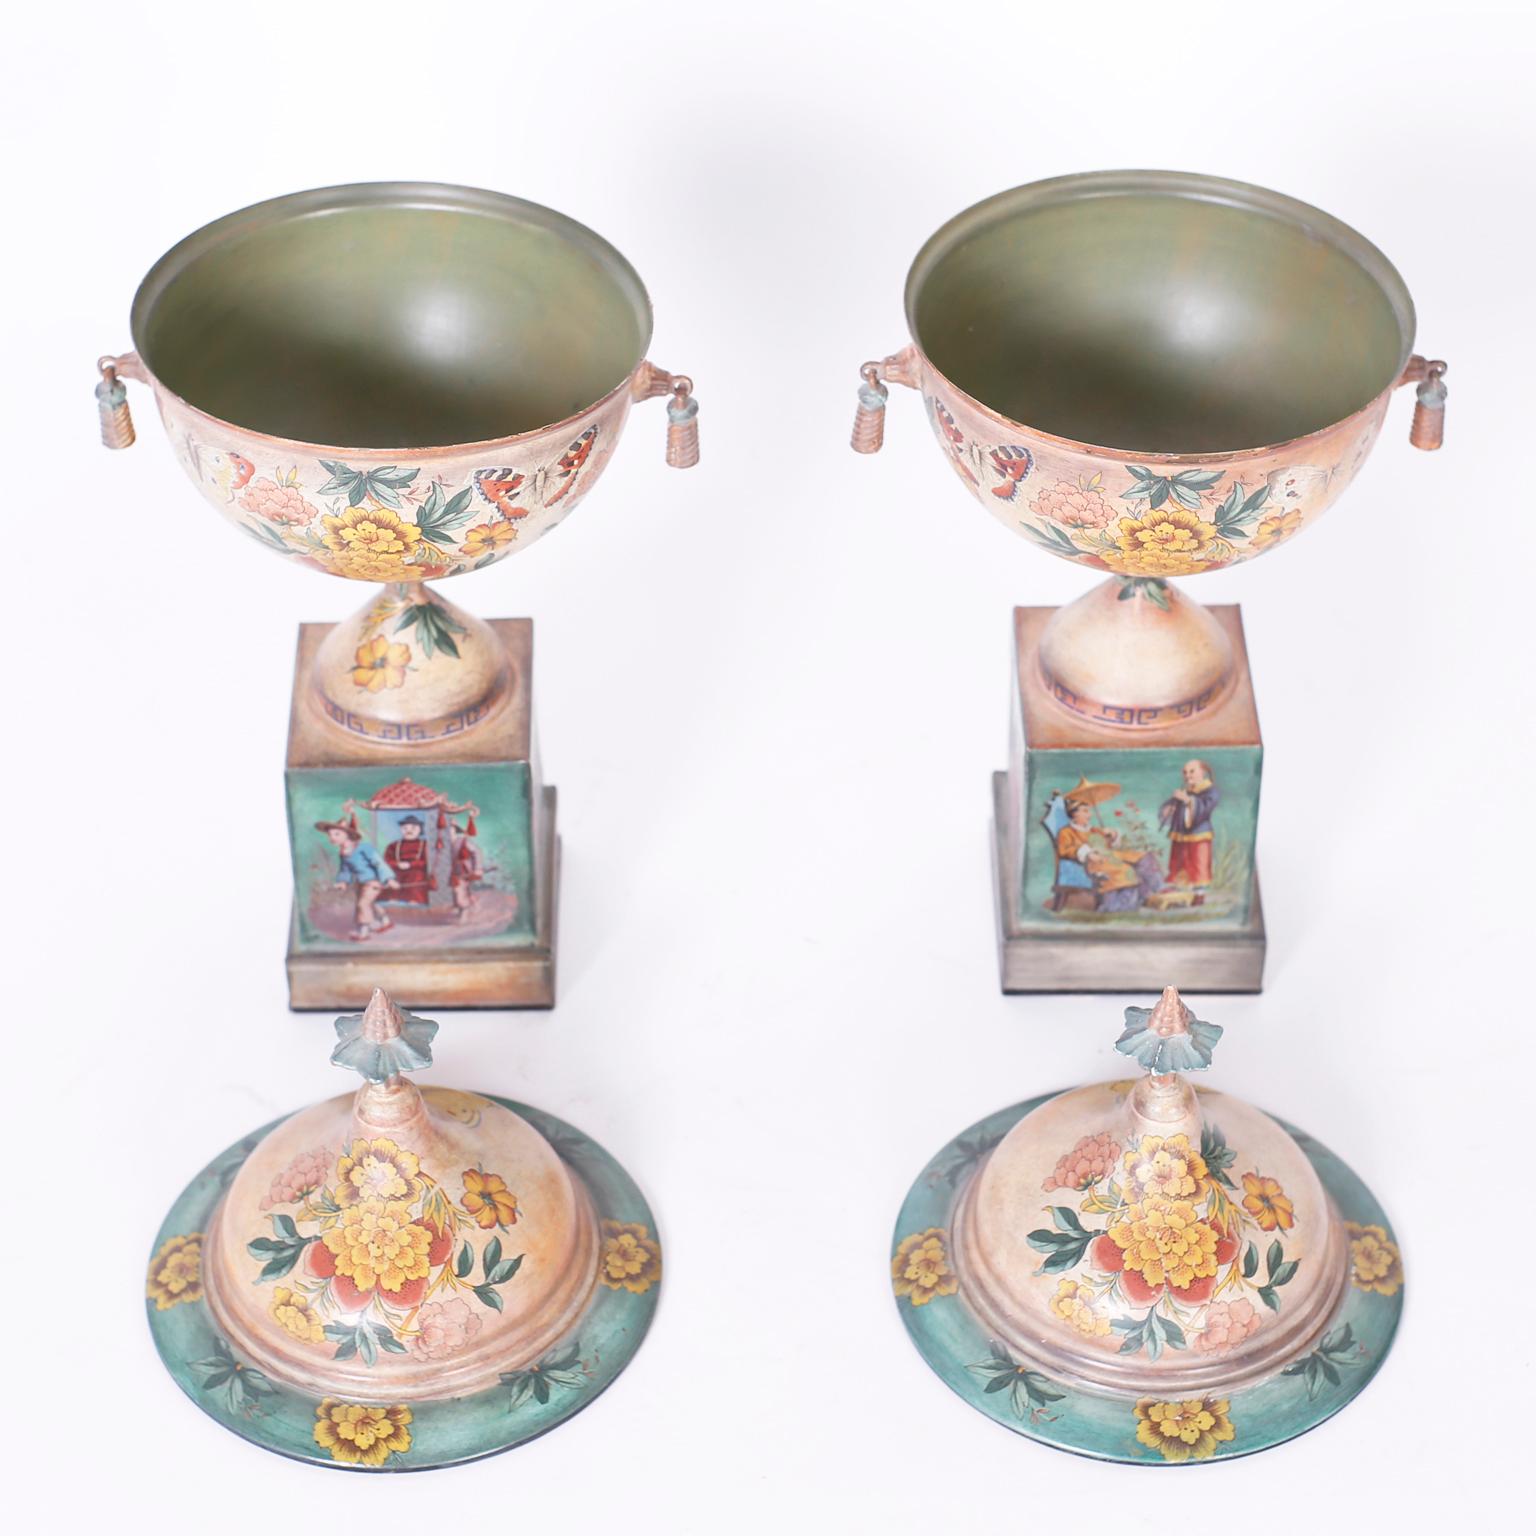 Antique pair of French tole lidded urns or garnitures with pagoda finials and Classic form, hand painted all around with flowers and scenes of chinoiserie. Signed indistinctly on the bottom.